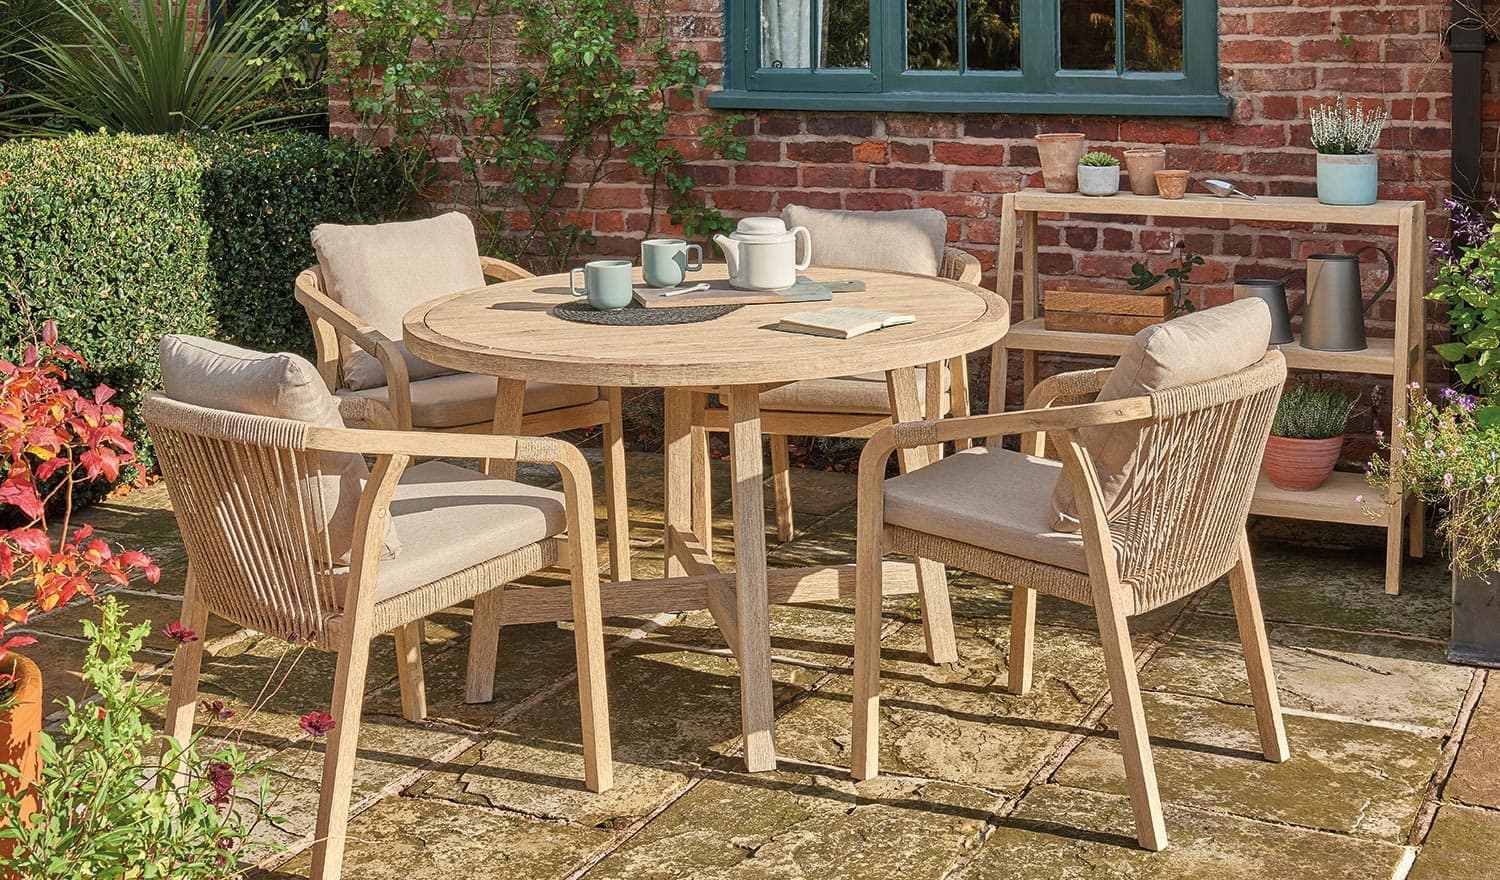 Cora 120cm Round Dining Table 4 Seater, Round Wooden Outdoor Table Set